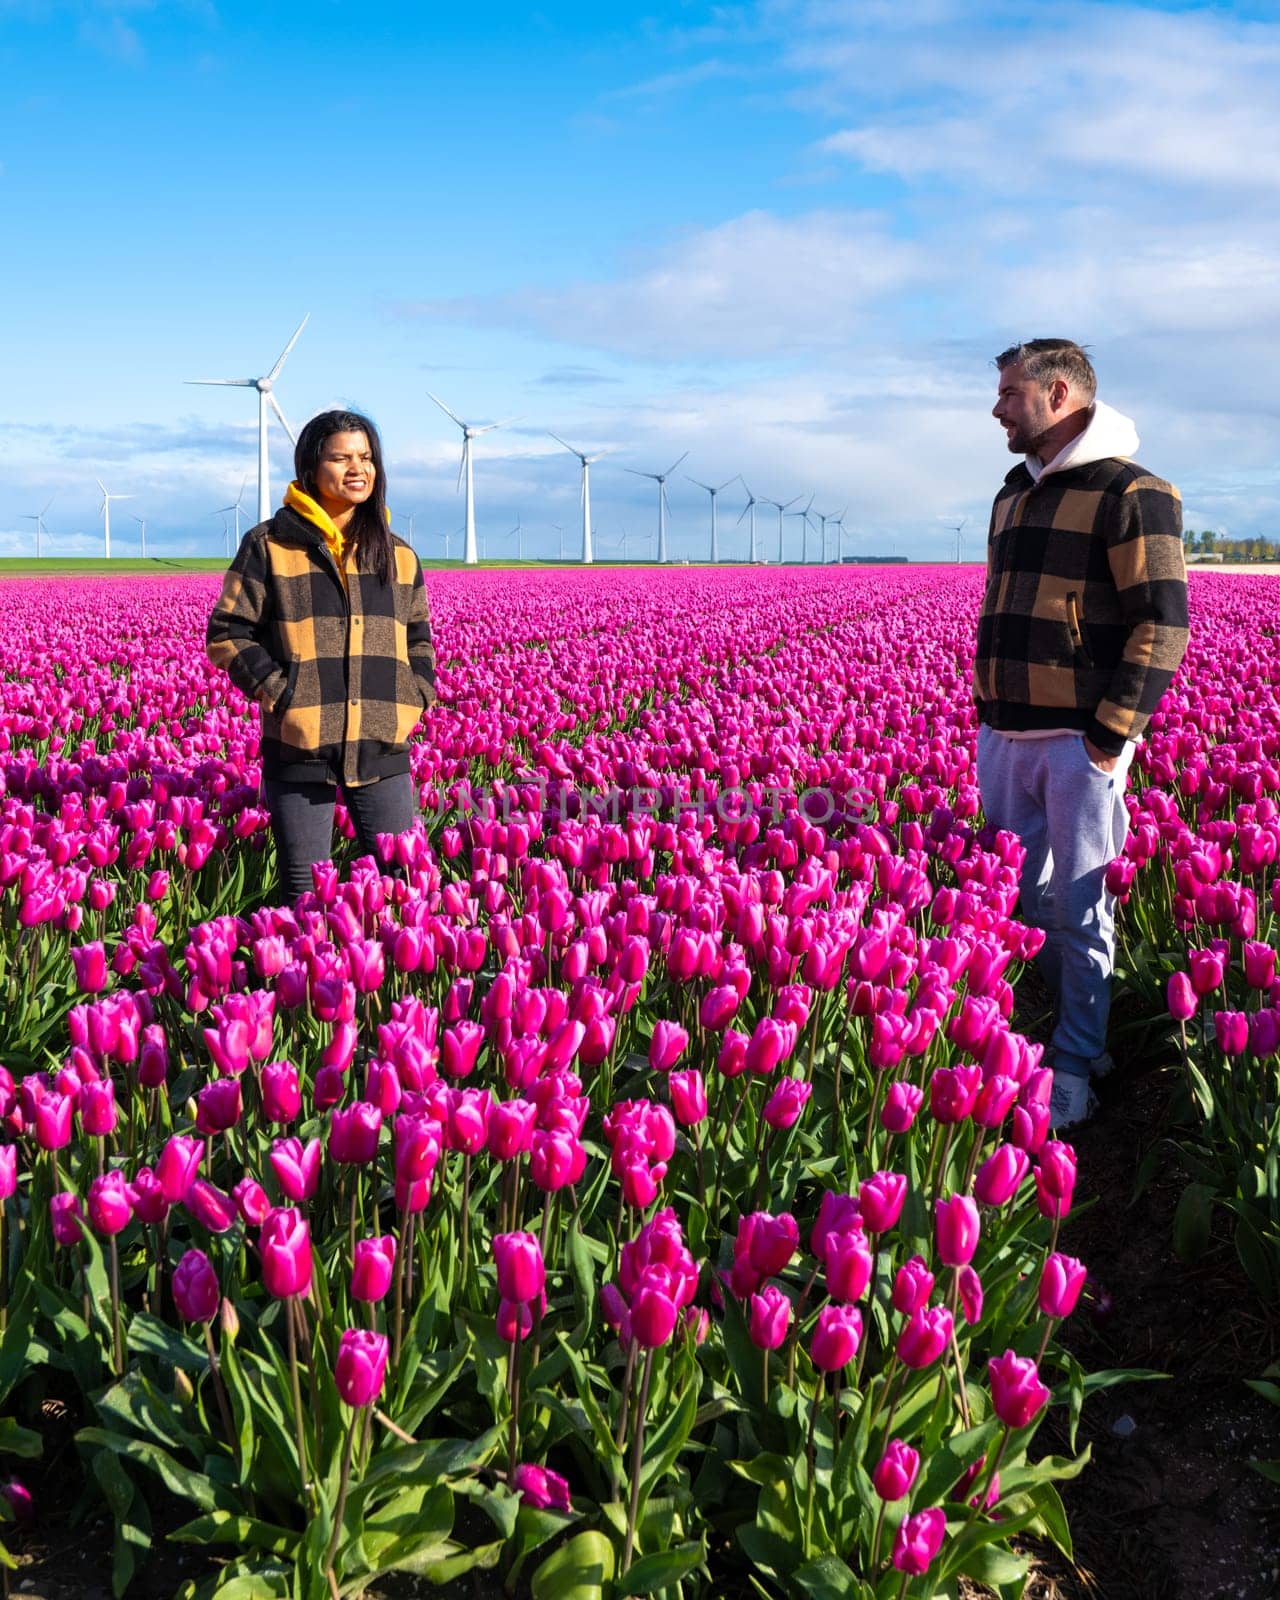 A couple holding hands, standing gracefully among a vibrant field of tulip flowers, surrounded by windmill turbines in the Netherlands in Spring.